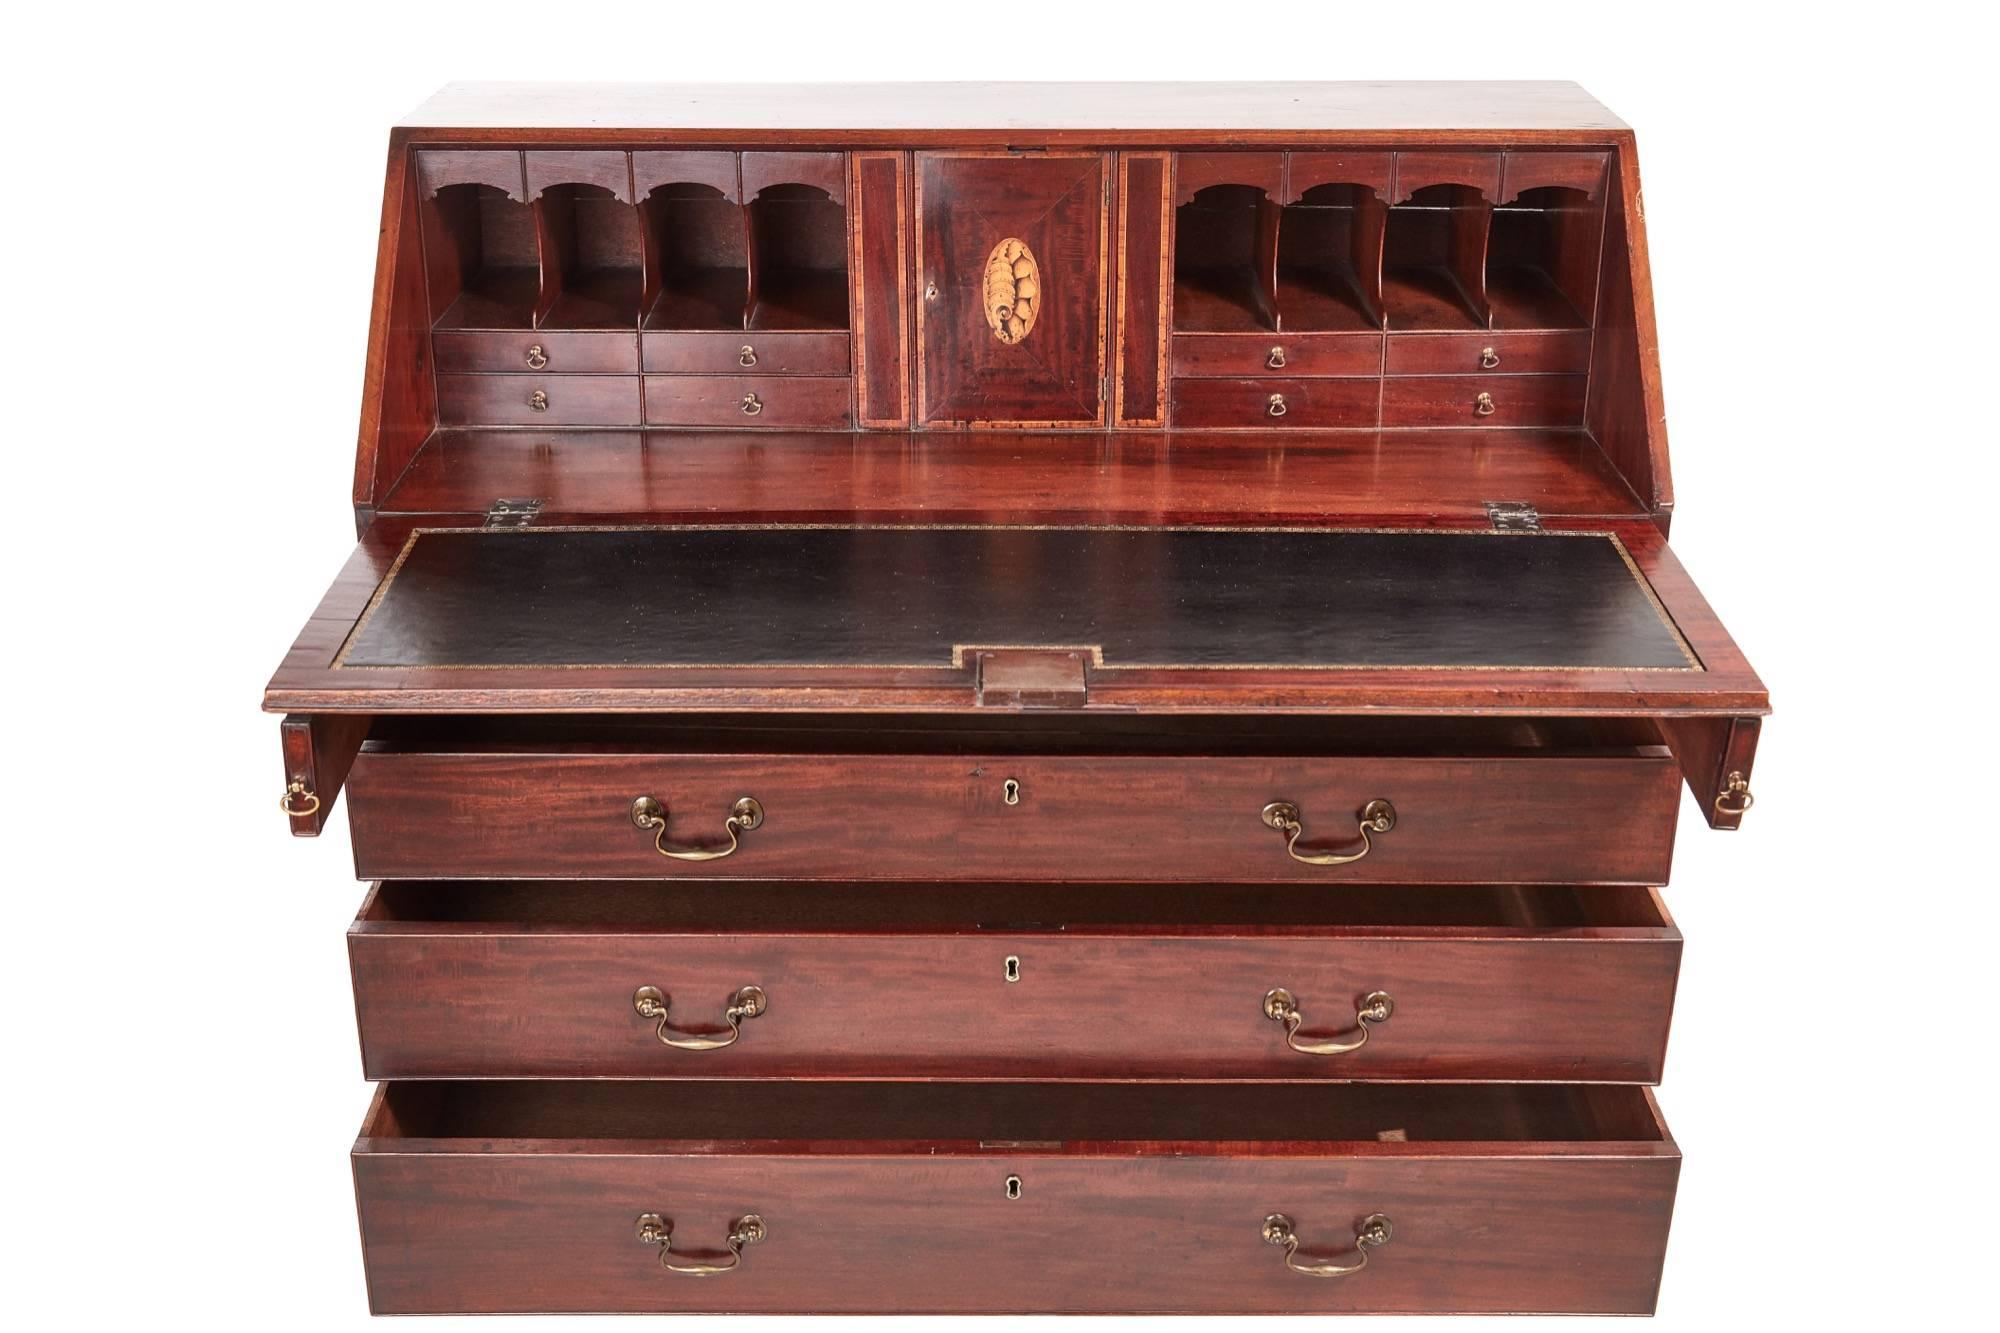 Fantastic quality large Georgian mahogany bureau, having two short and three long drawers with original brass handles, the mahogany fall opens to a outstanding fitted interior with secret drawers, standing on original ogee bracket feet
Fantastic